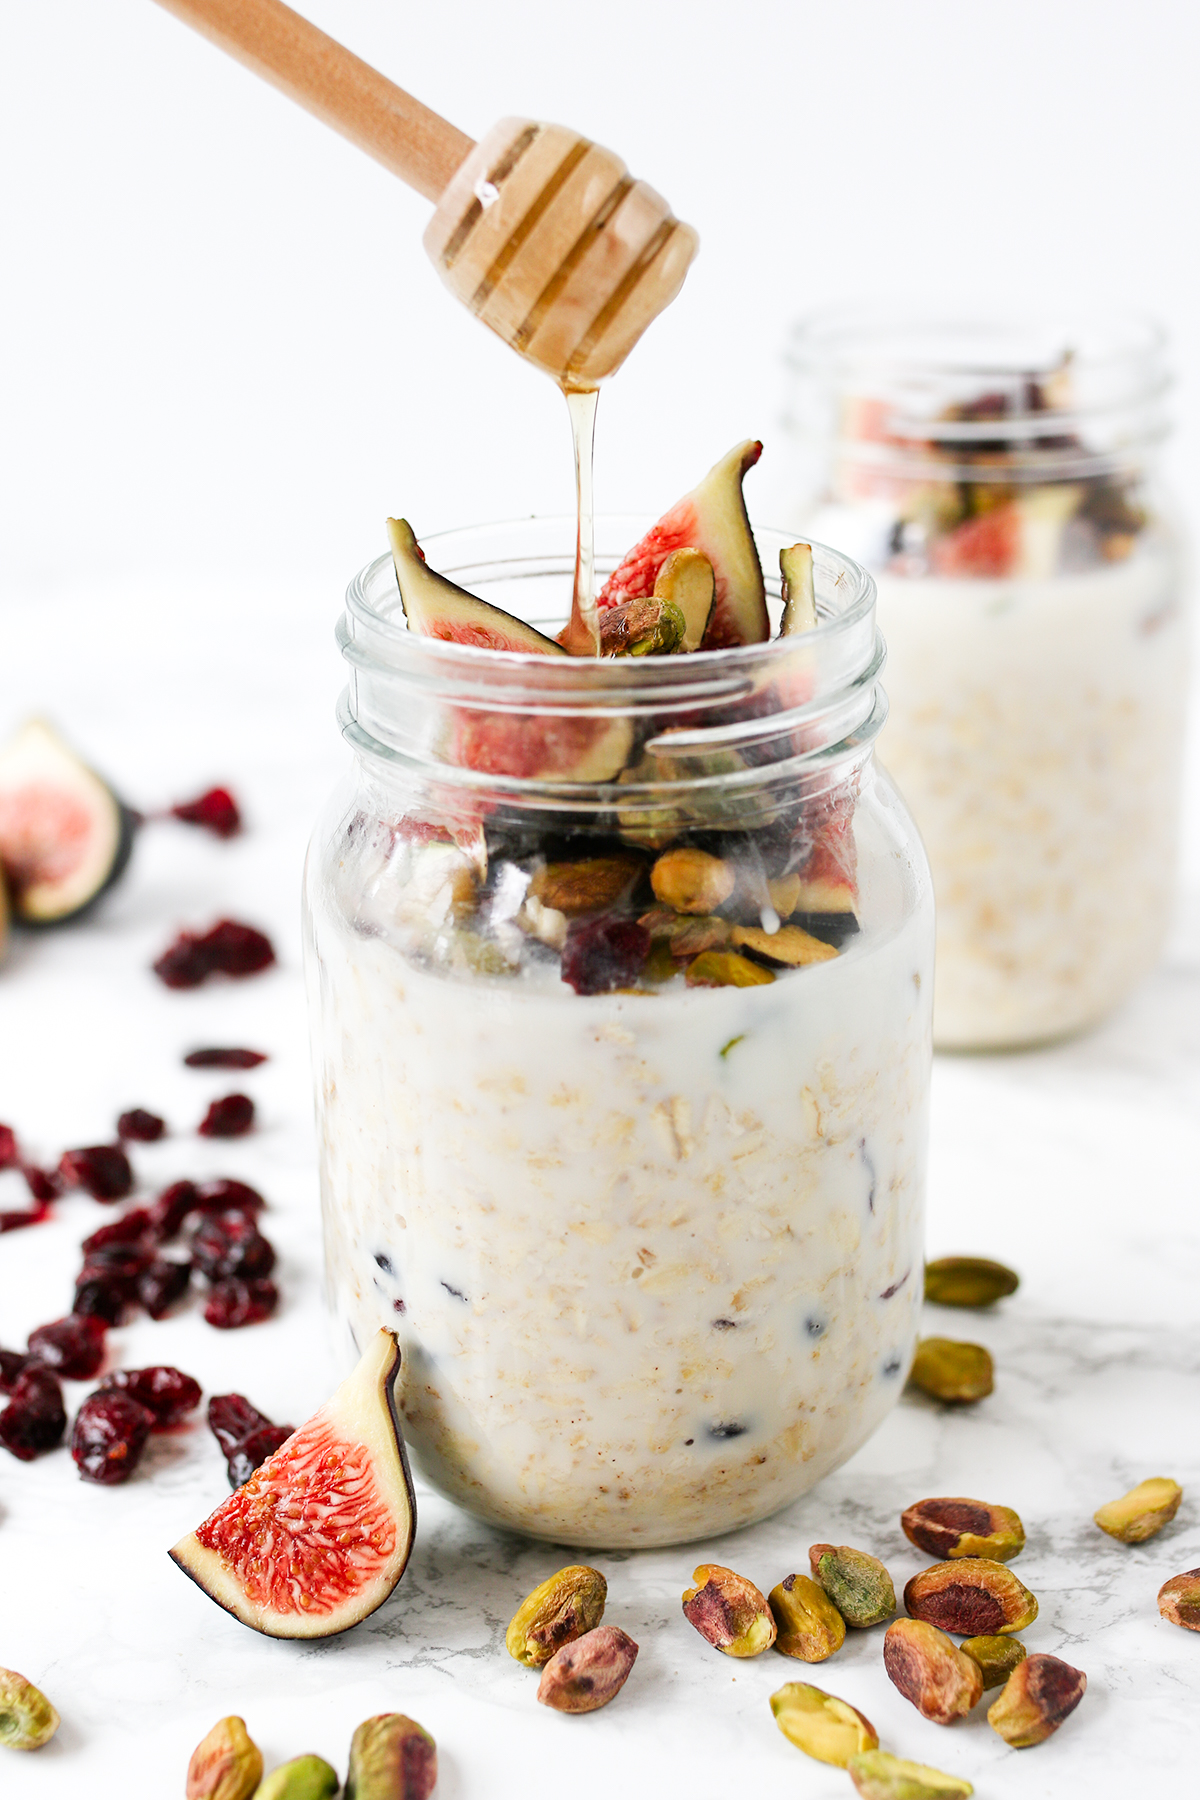 Overnight oats finished tall4